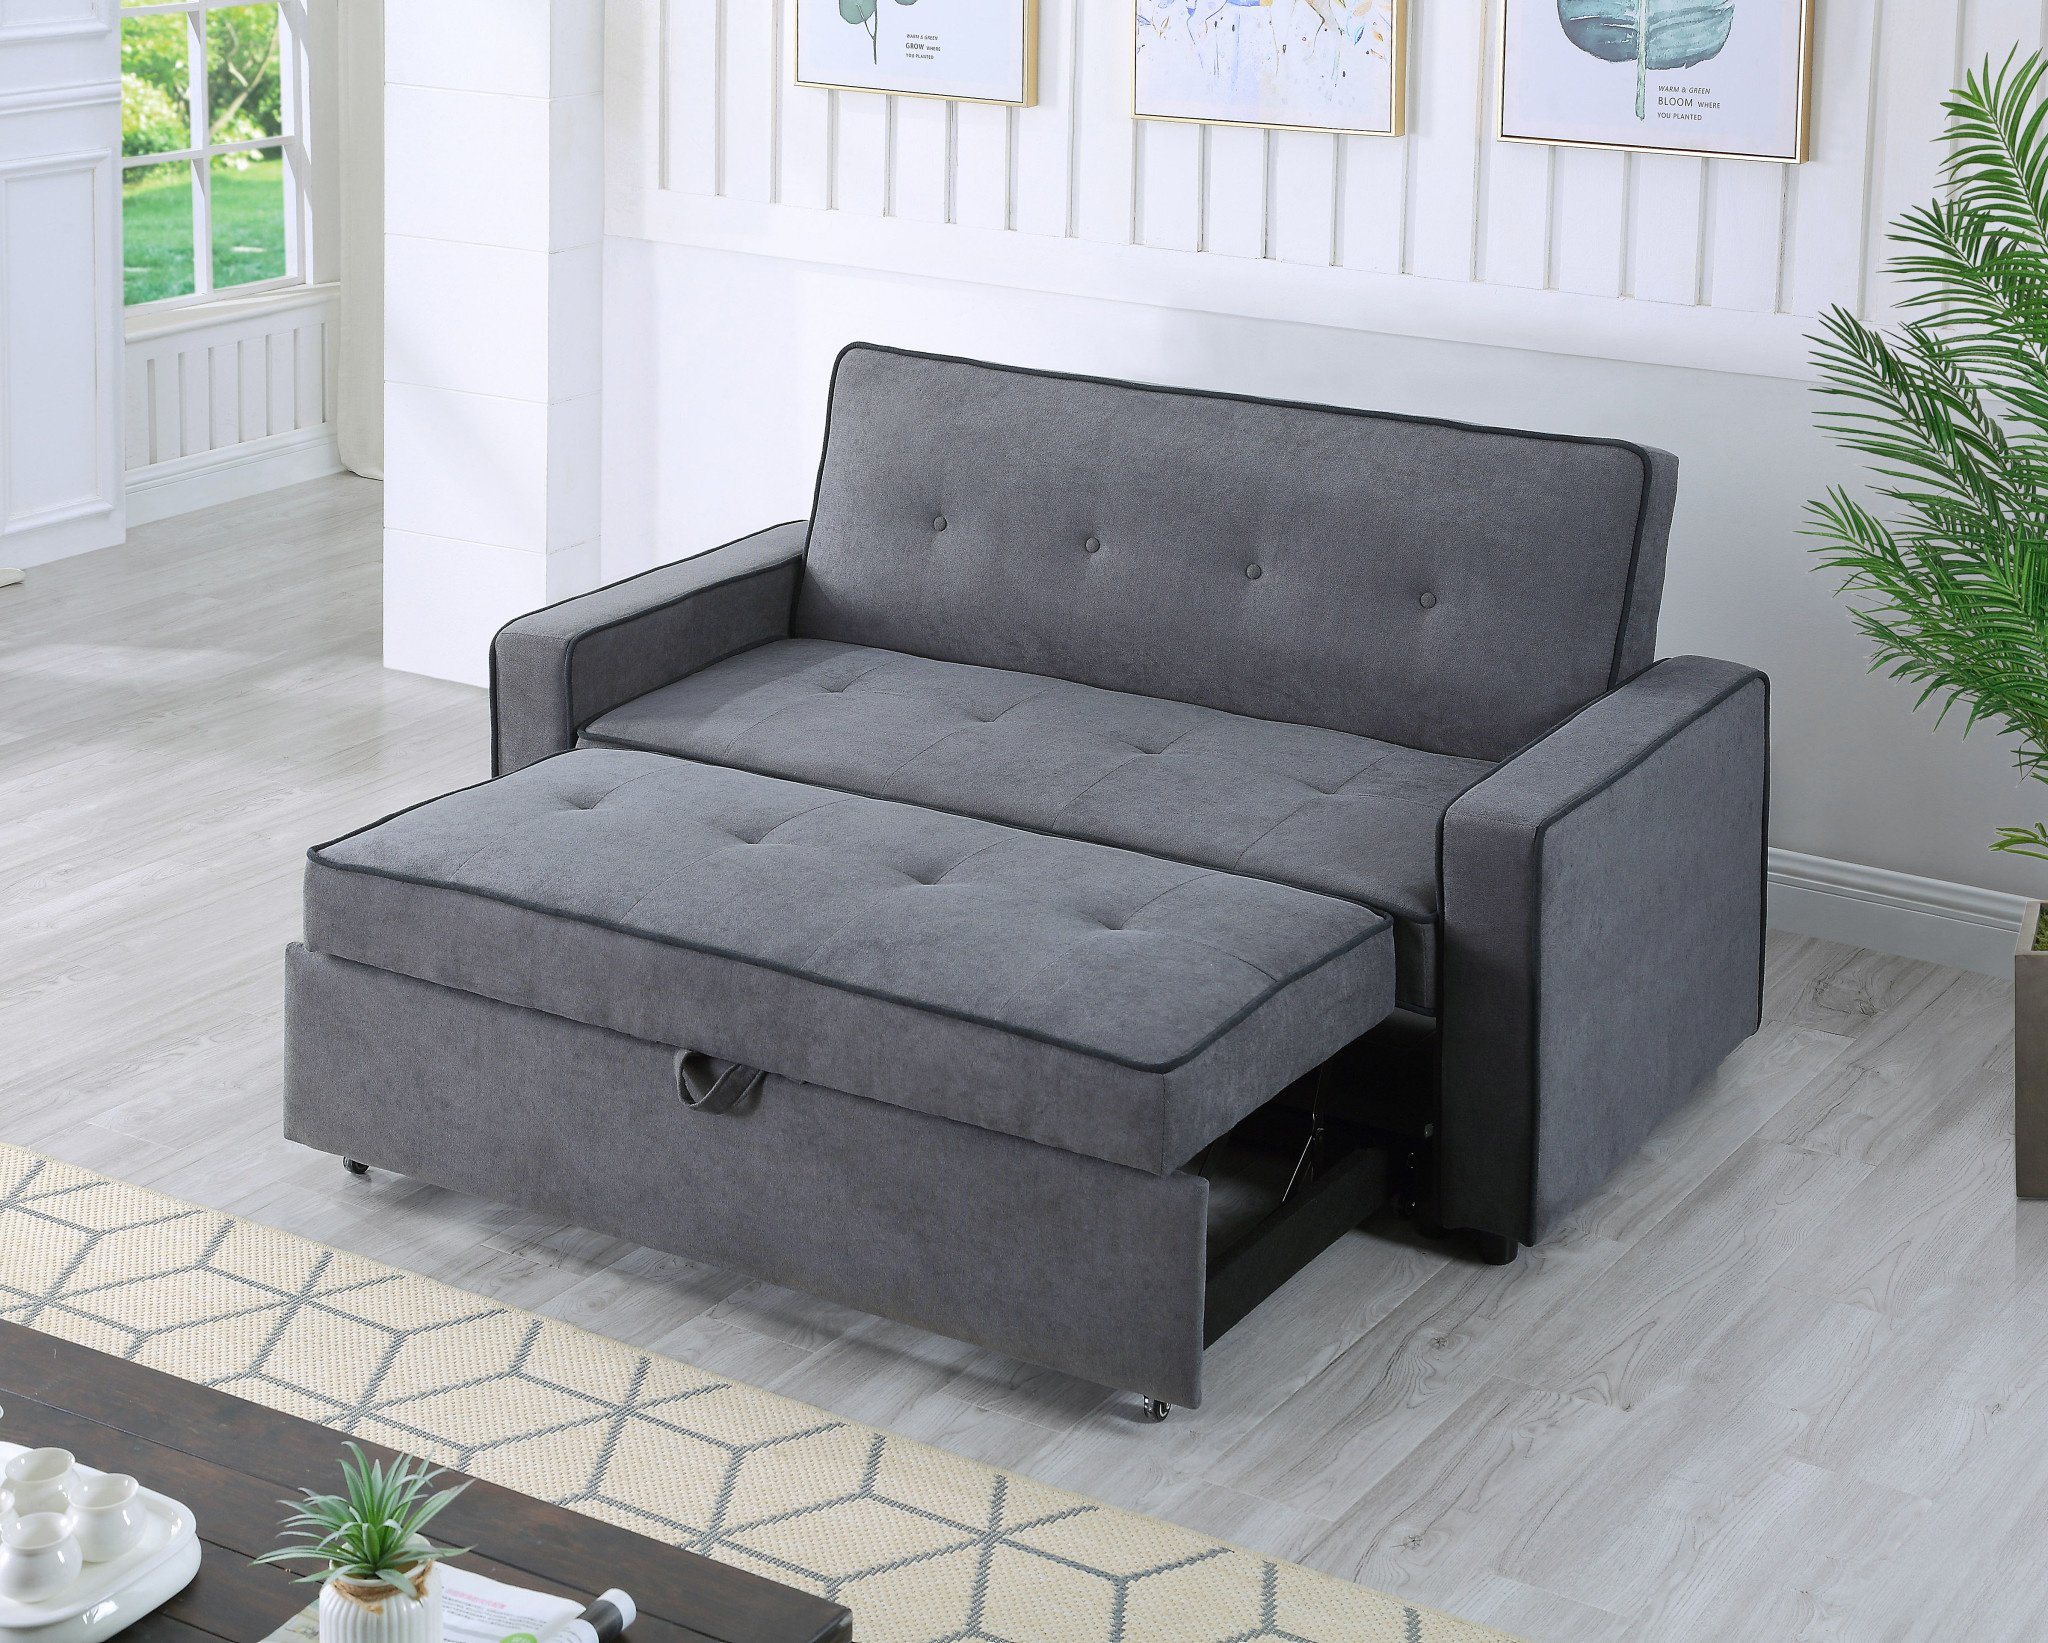 purchase sofa bed online